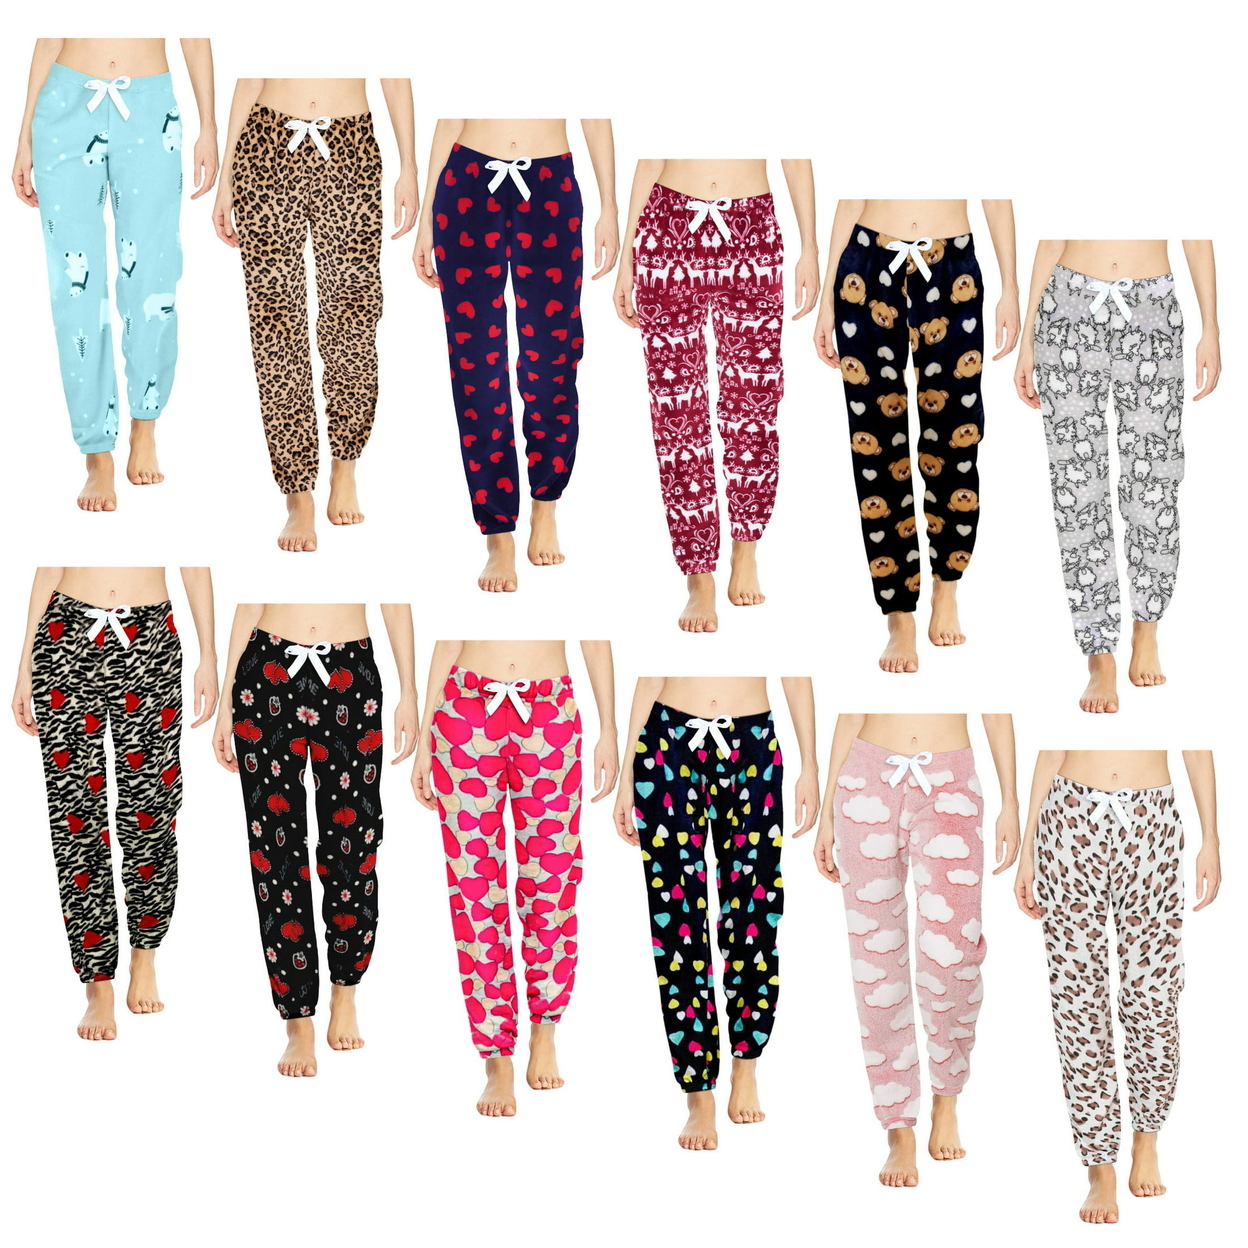 Multi-Pack: Women's Printed Ultra-Soft Comfy Stretch Micro-Fleece Pajama Lounge Pants - 3-pack, Shapes, Xx-large